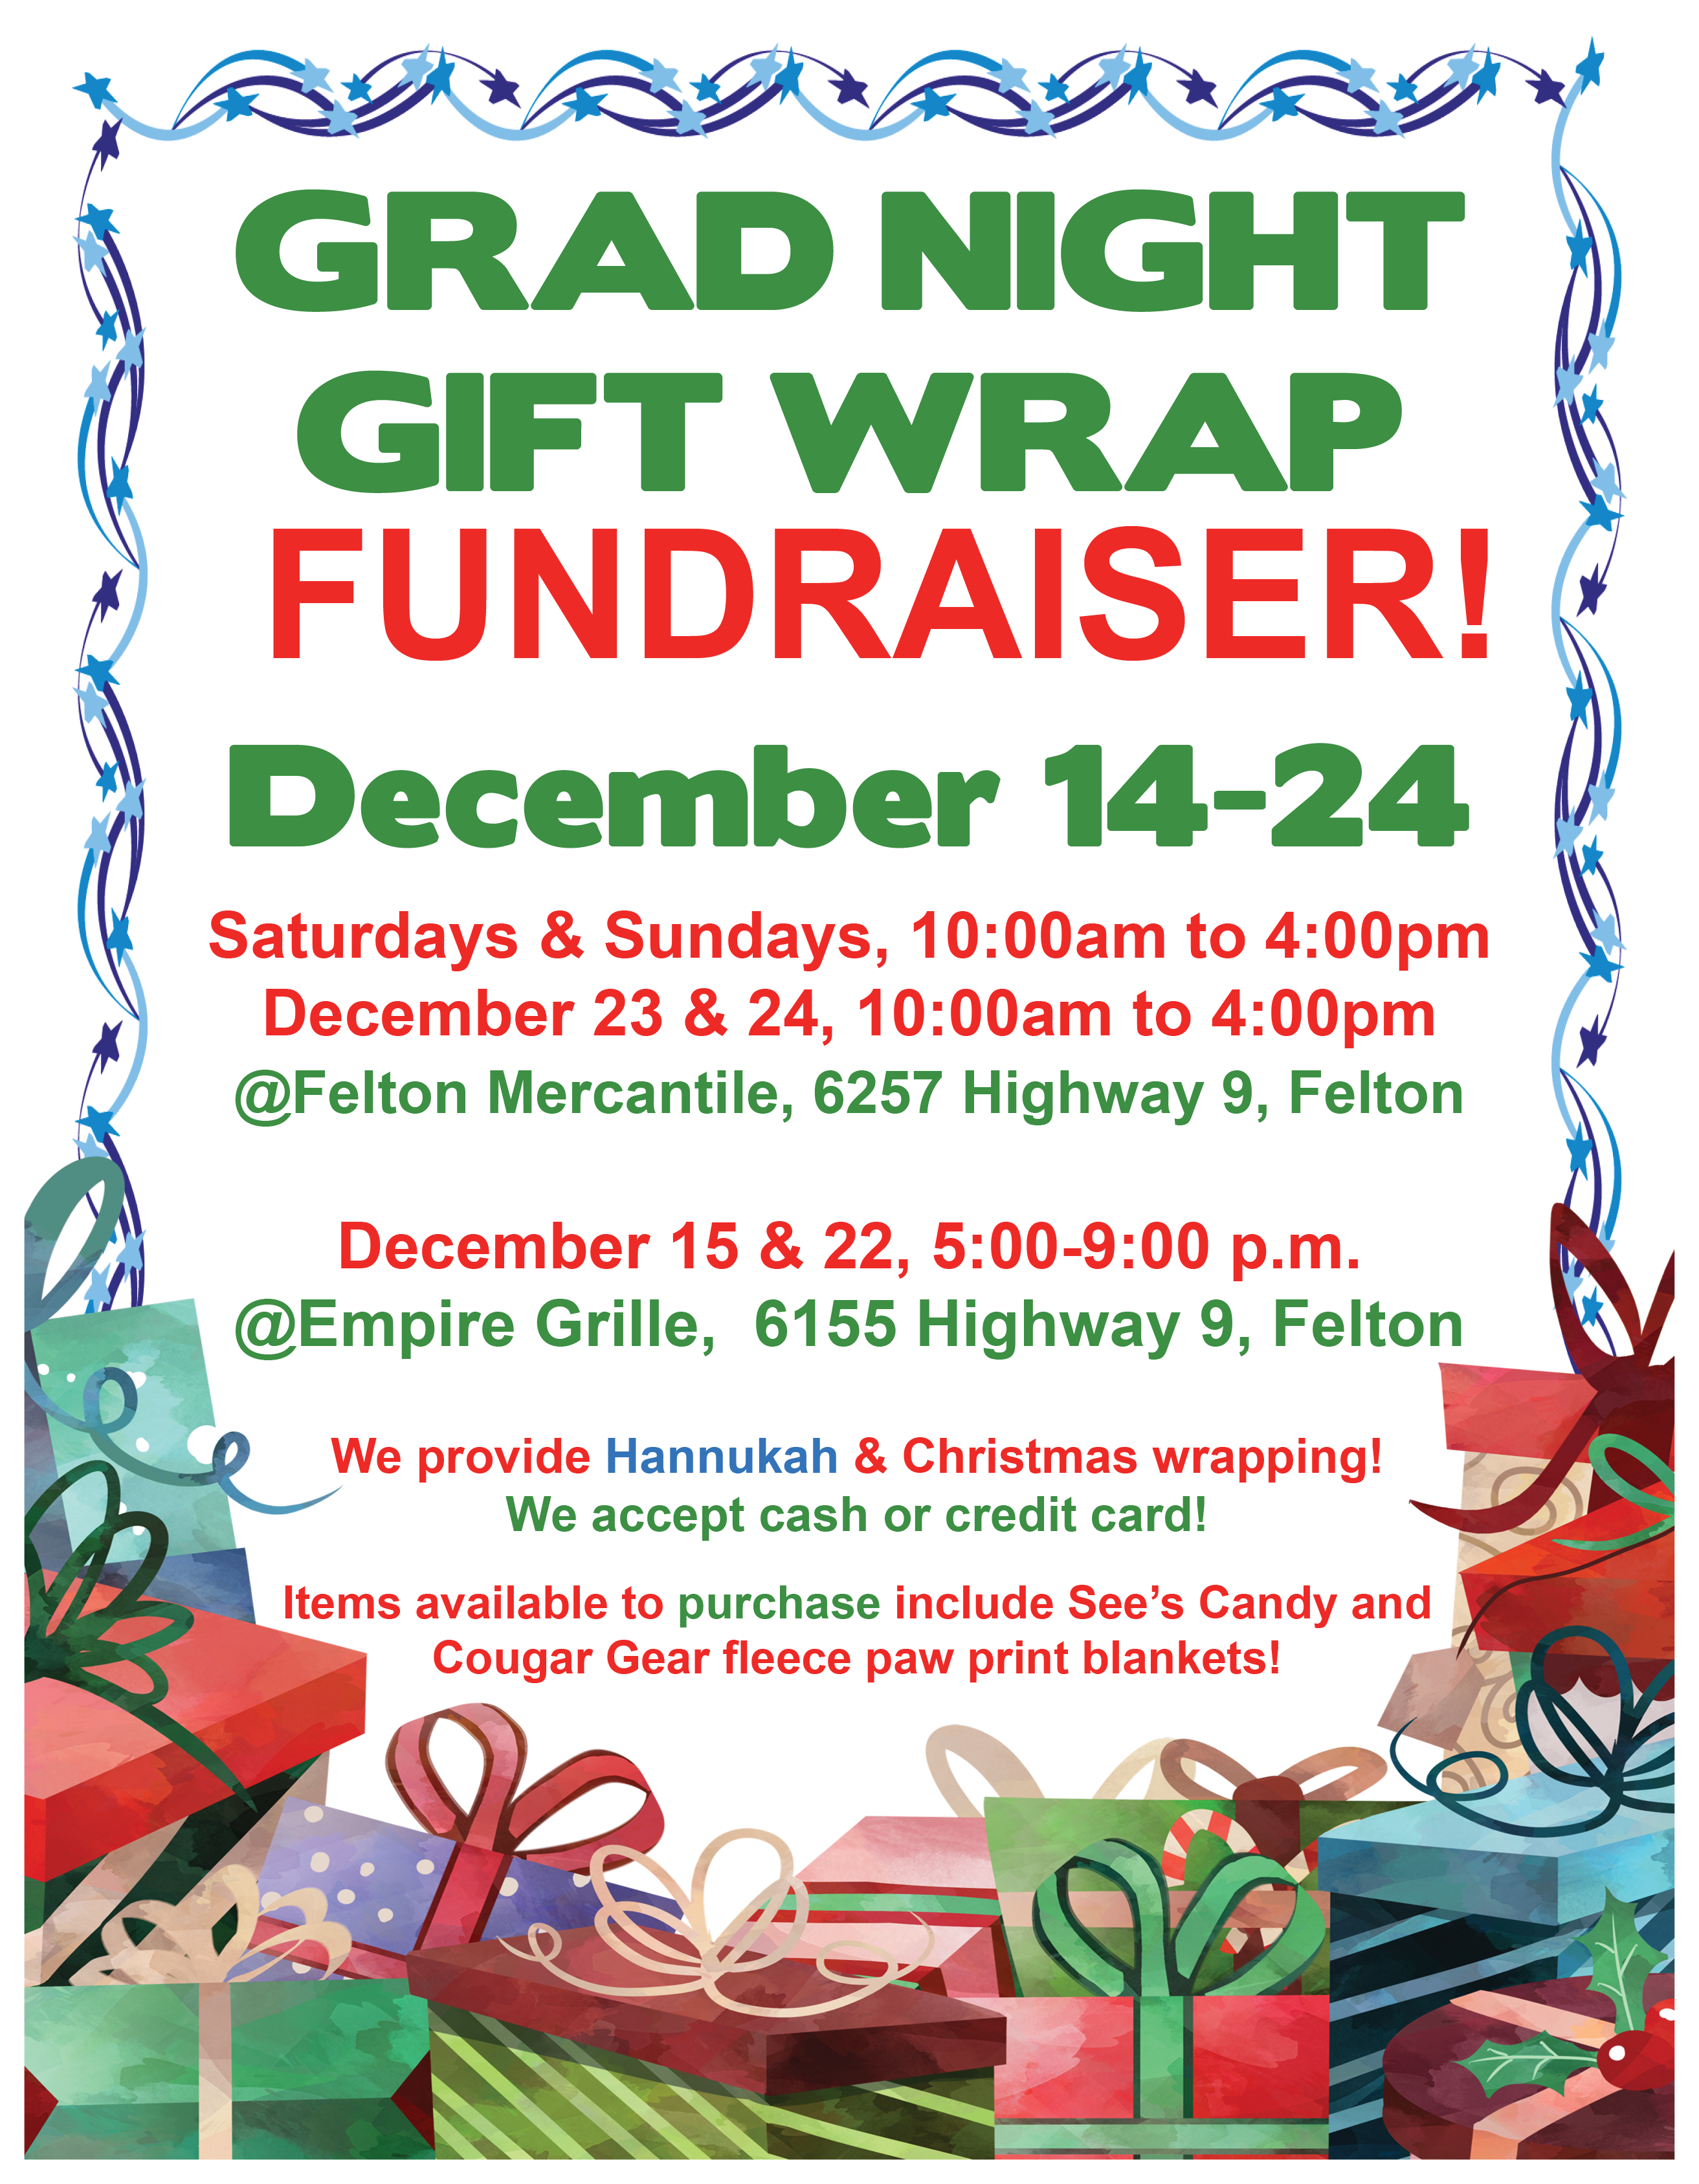 grad night gift wrap fundraiser; call 335-4425 x201 for information